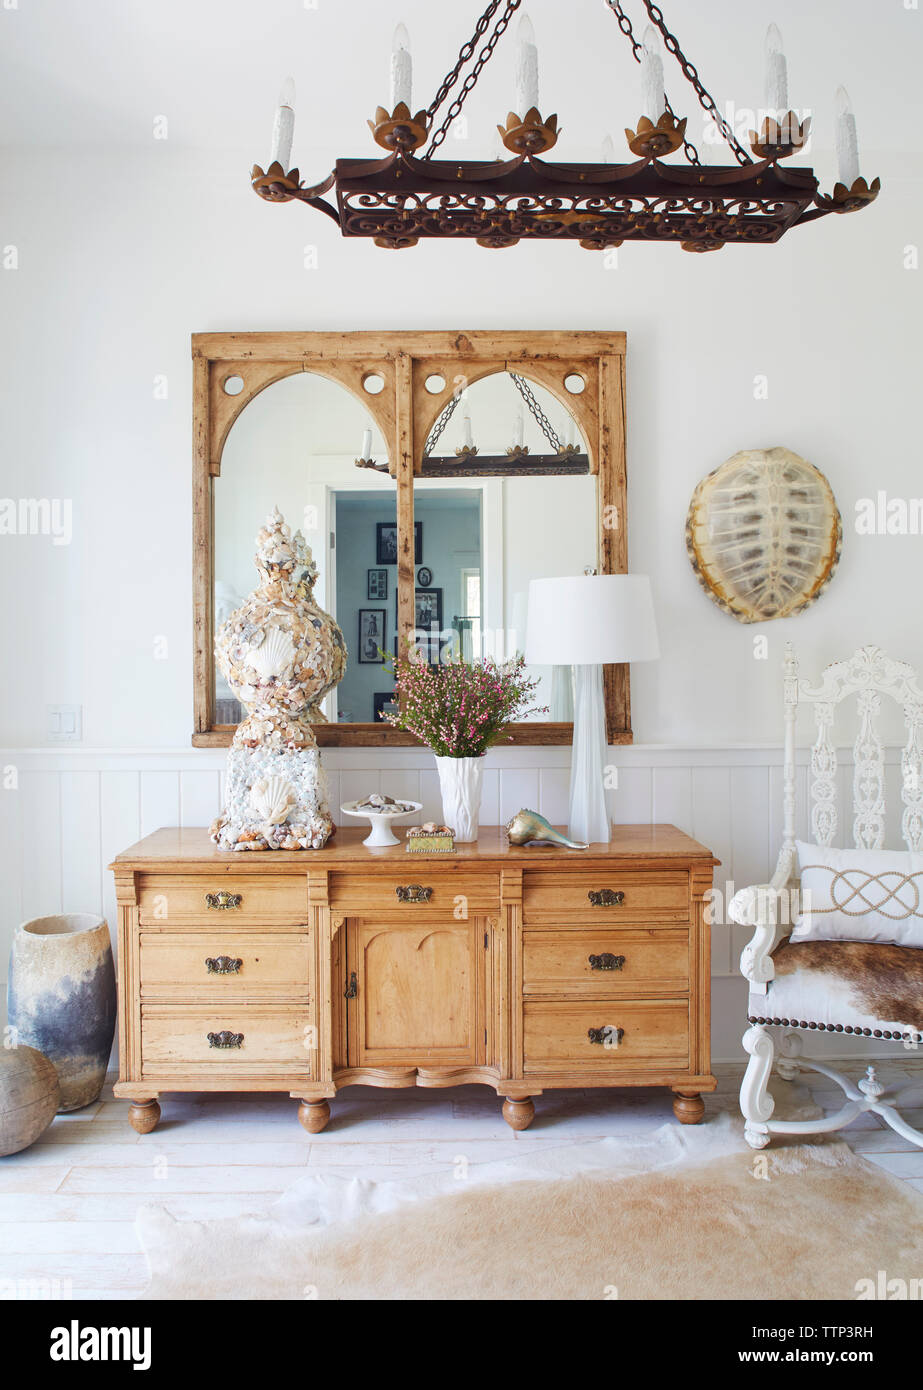 Chandelier Over Cabinet And Mirrors In Beach Cottage Stock Photo